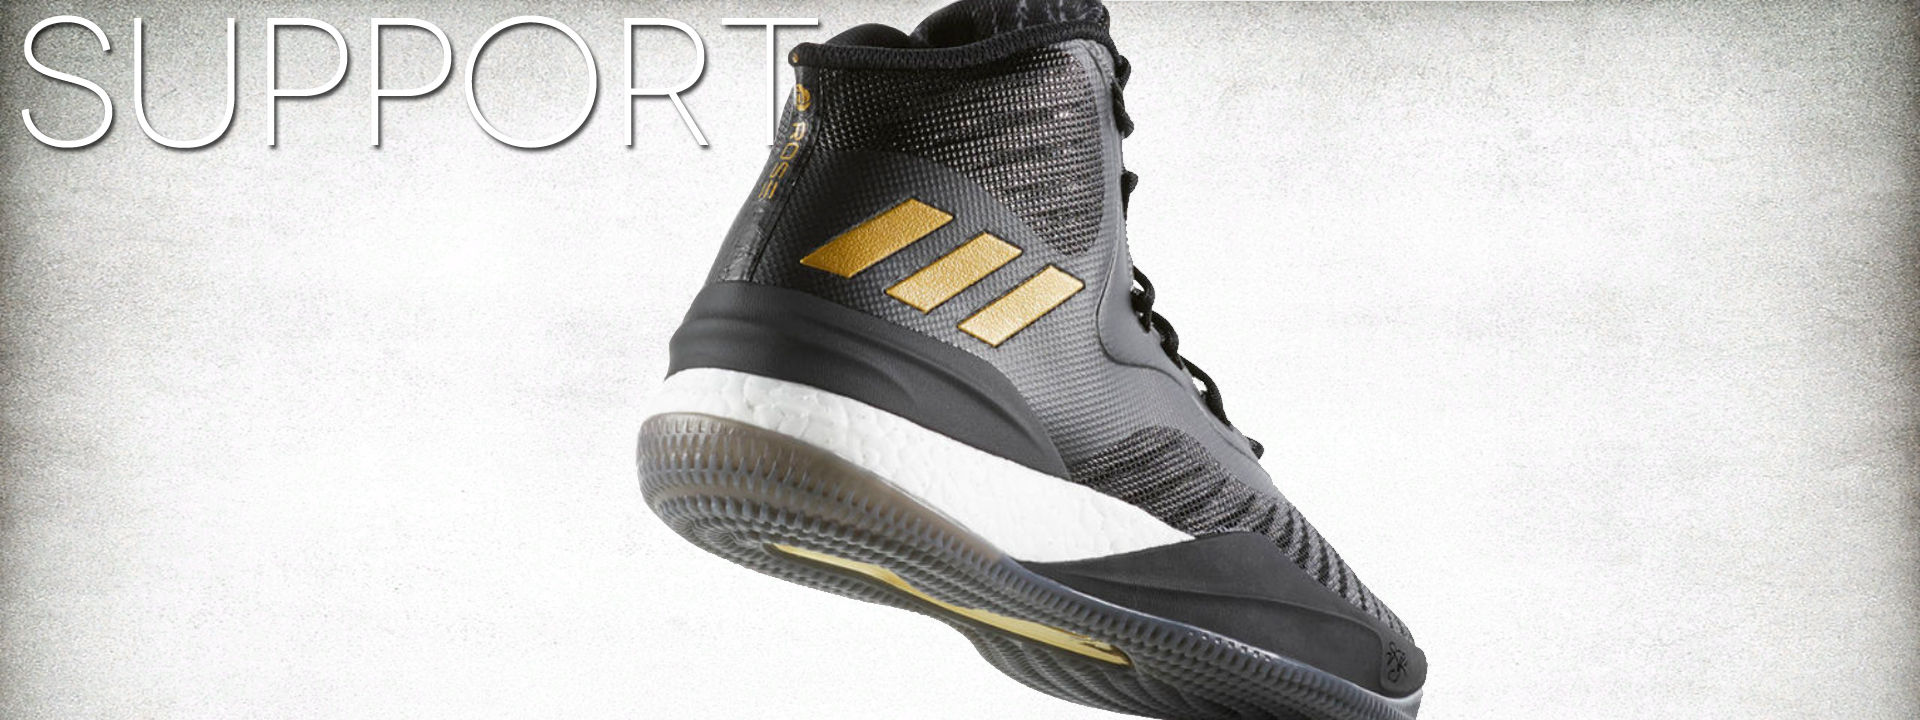 adidas d rose 8 performance review support